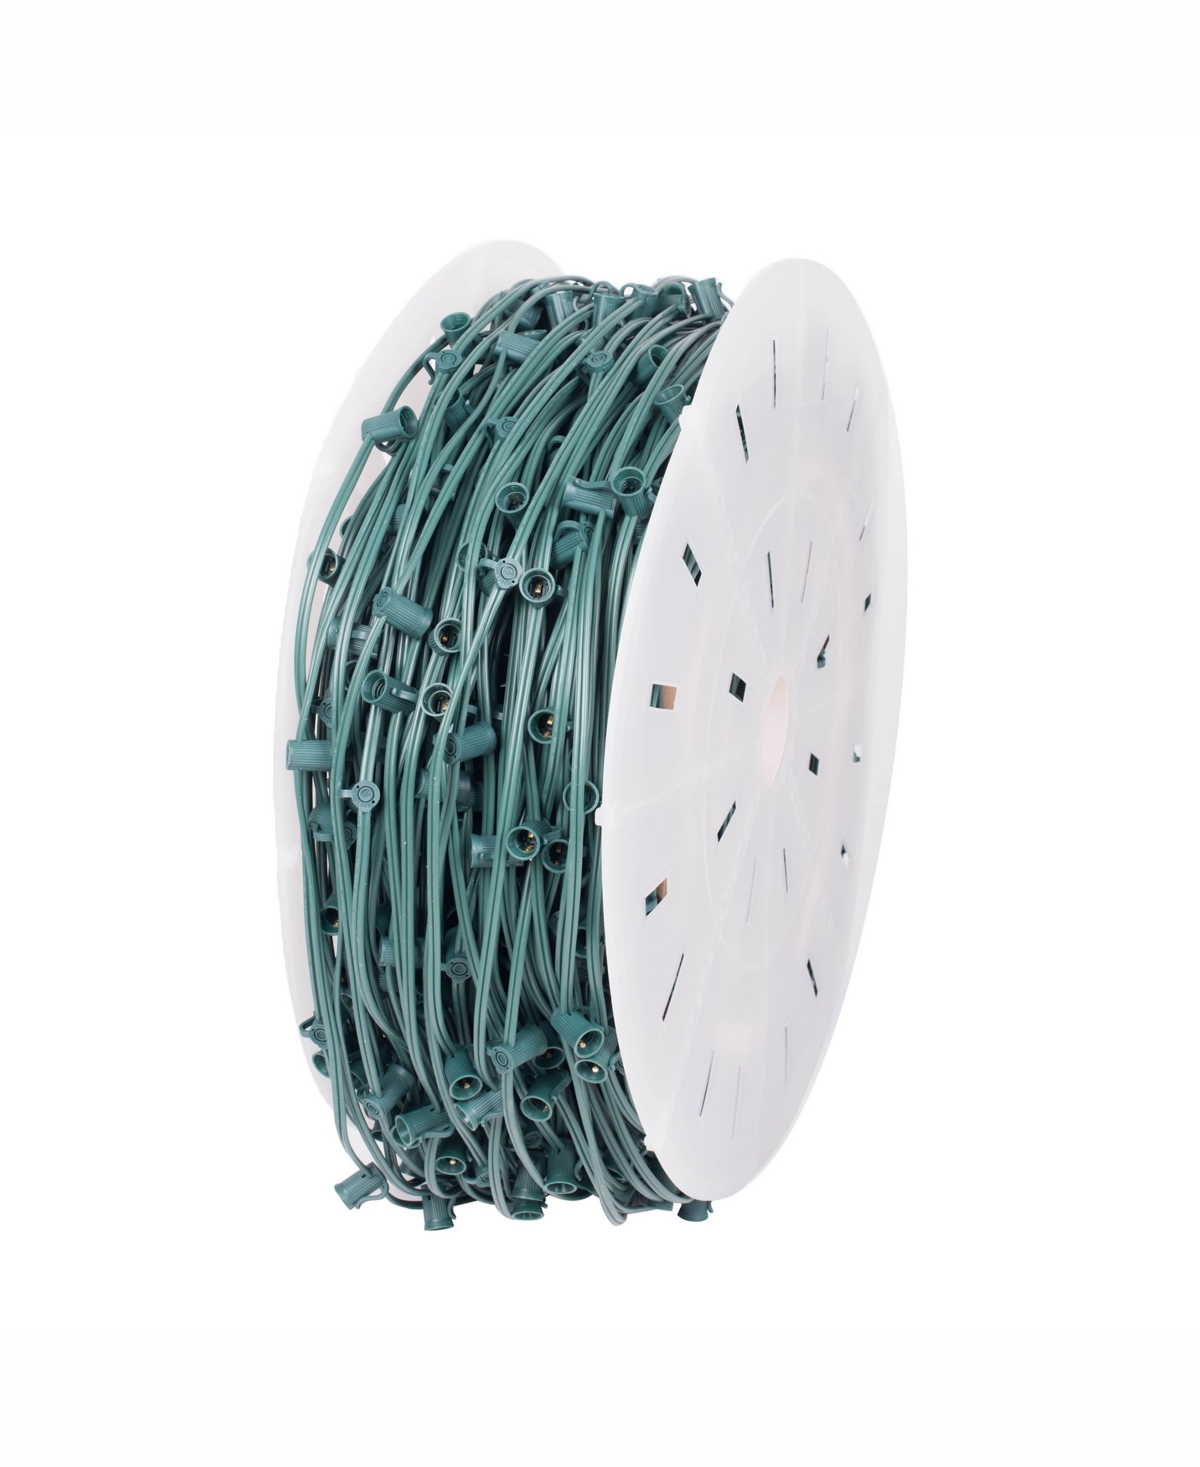 1000' C7 Socket String with 1000 C7 Sockets on SPT2 18 Gauge Green Wire - Green